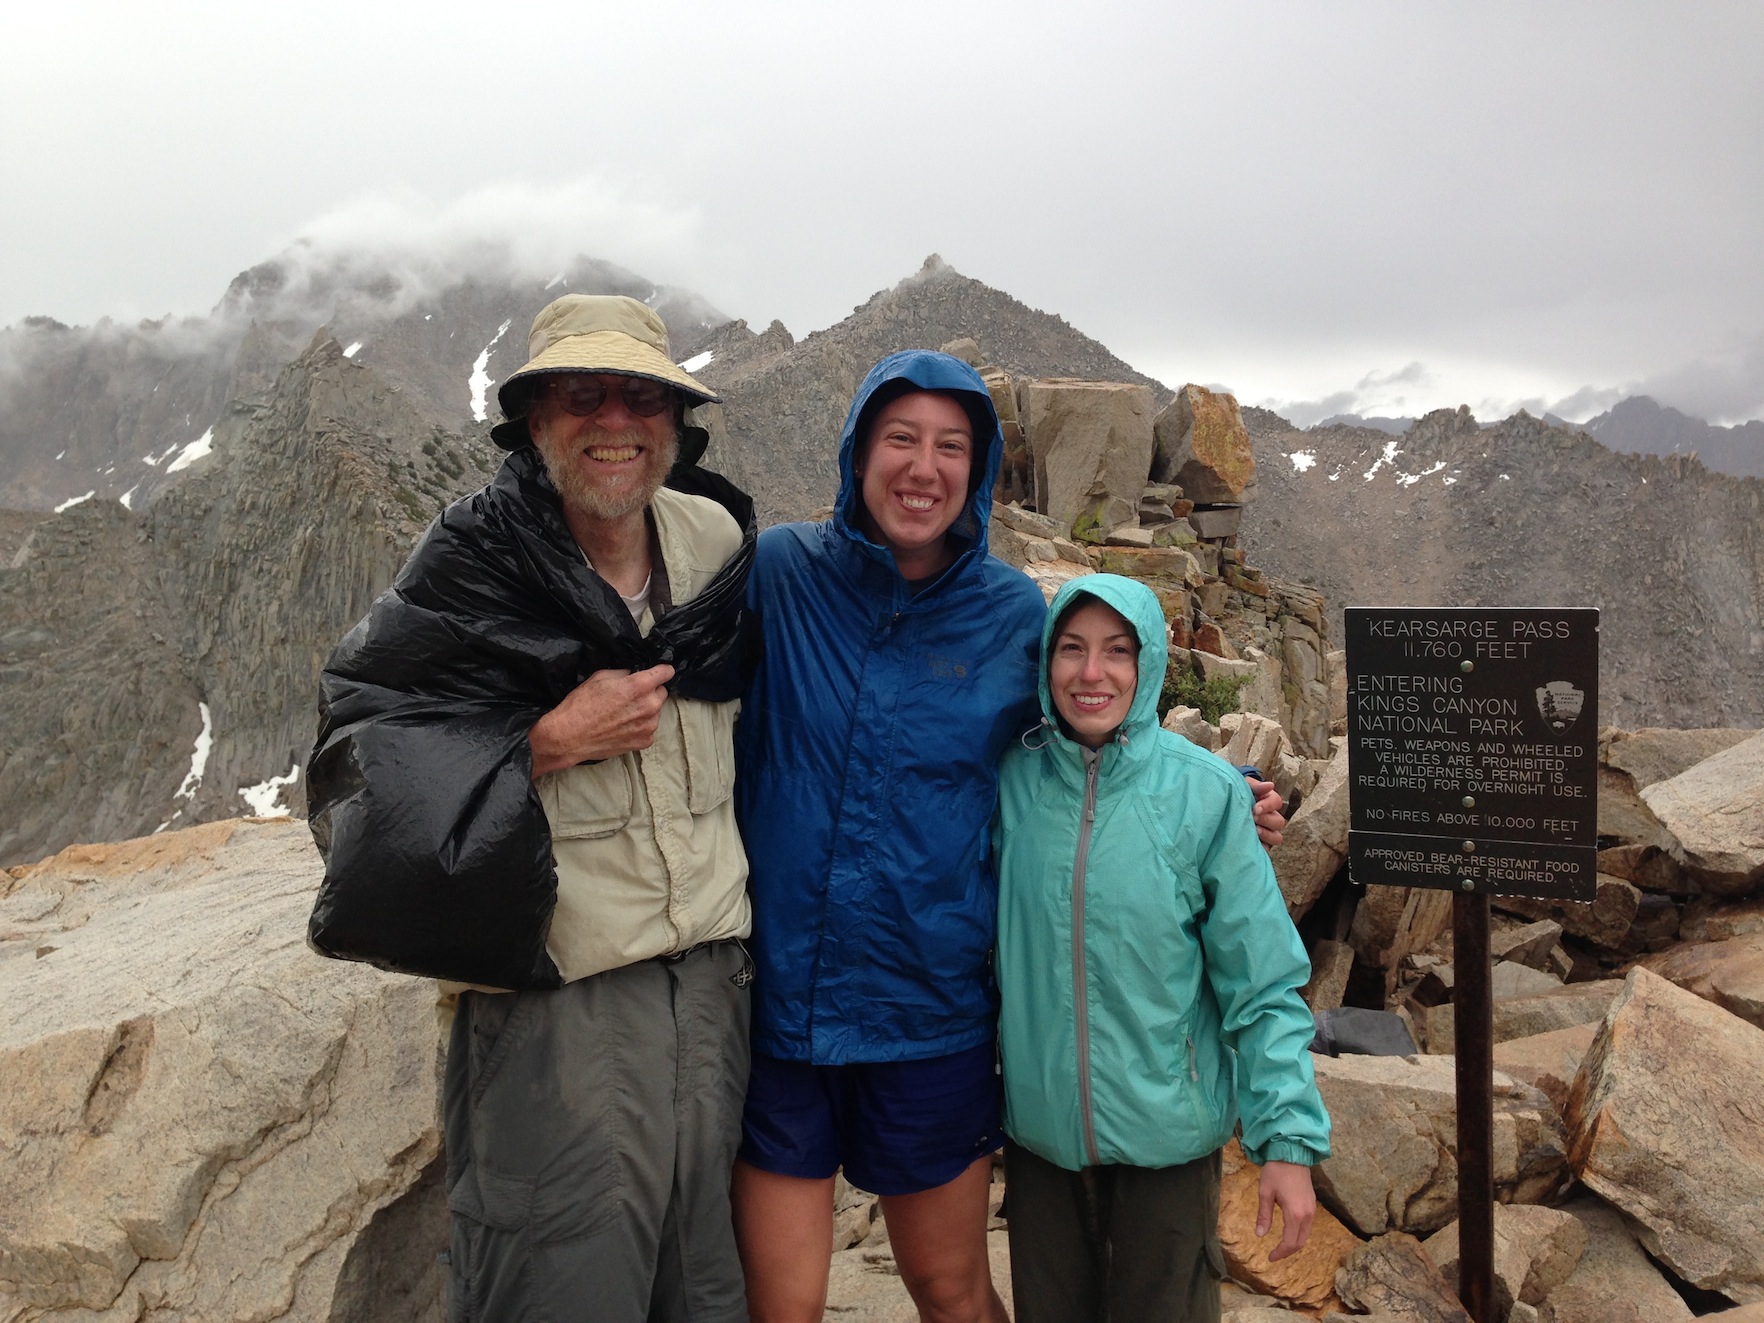 JMT hikers Martha and Kate on Kearsarge Pass on a stormy, cold July 15th with Dr. John Wehausen, founder of the Sierra Nevada Bighorn Sheep Foundation.